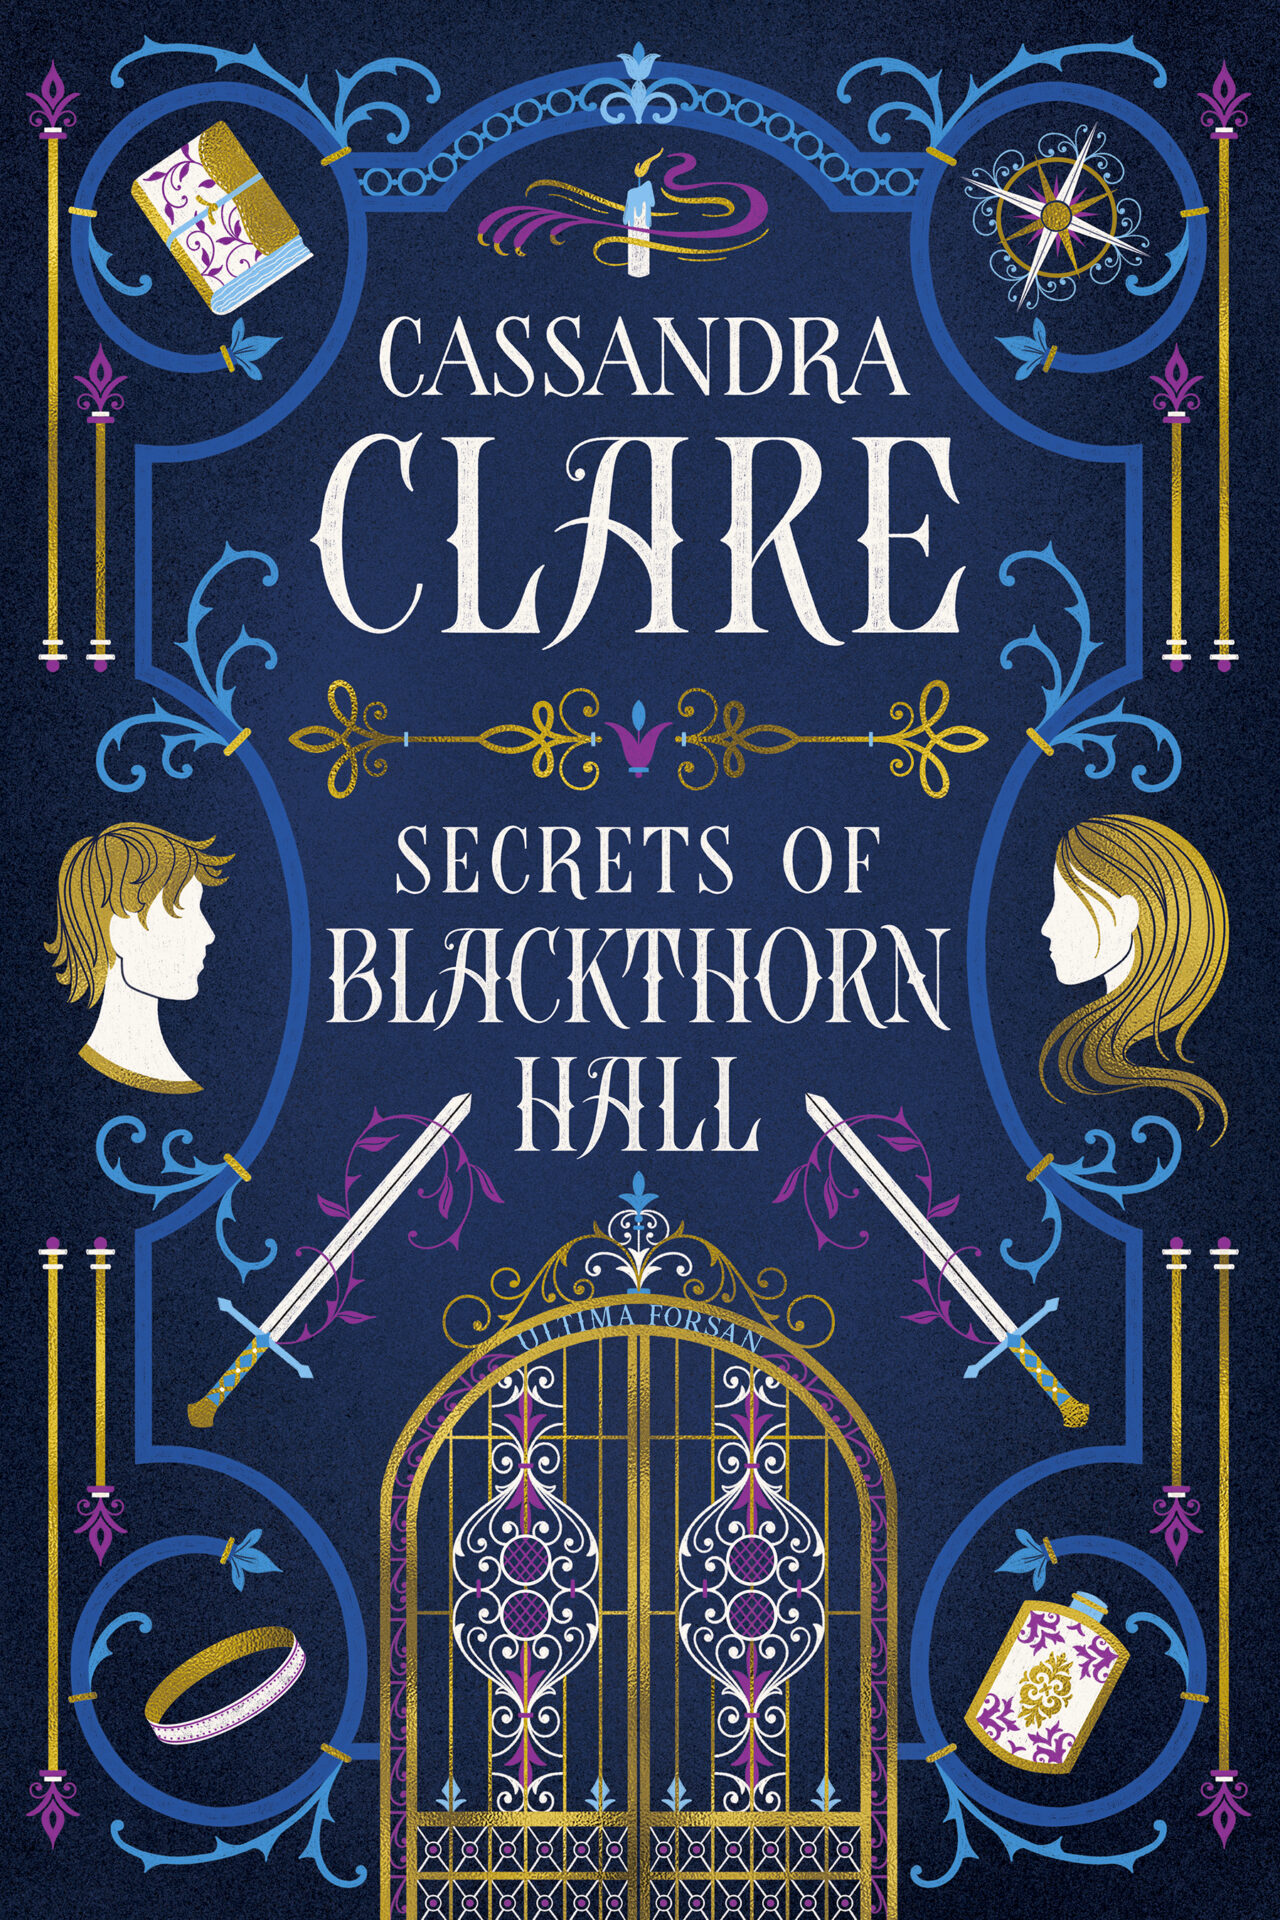 Secrets of Blackthorn Hall, The Shadowhunters' Wiki